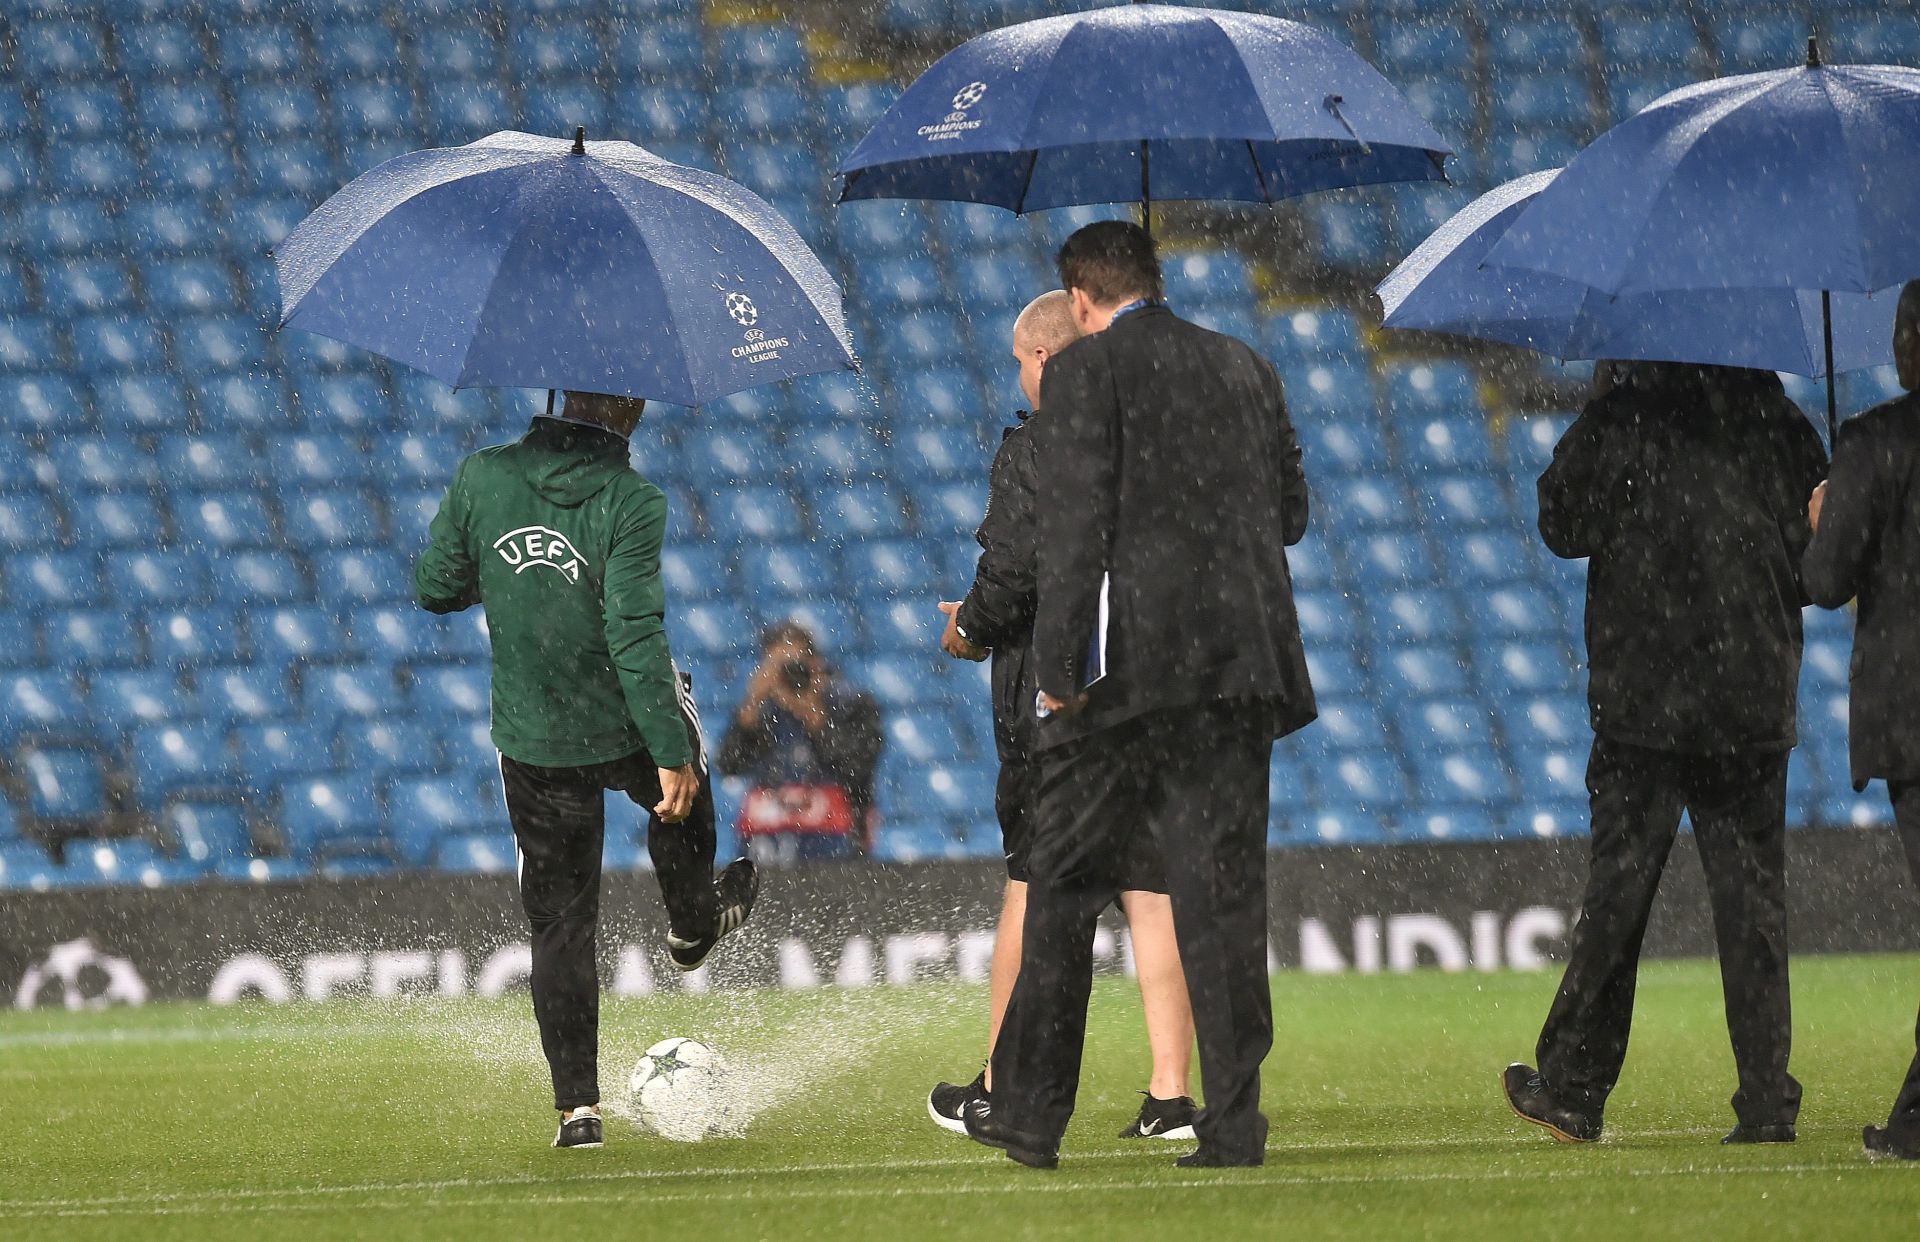 epa05538190 An UEFA official kicks a ball on the pitch as heavy rain falls before the UEFA Champions League Group C match between Manchester City and Borussia Monchengladbach held at the Etihad Stadium in Manchester, Britain, 13 September 2016.  EPA/PETER POWELL